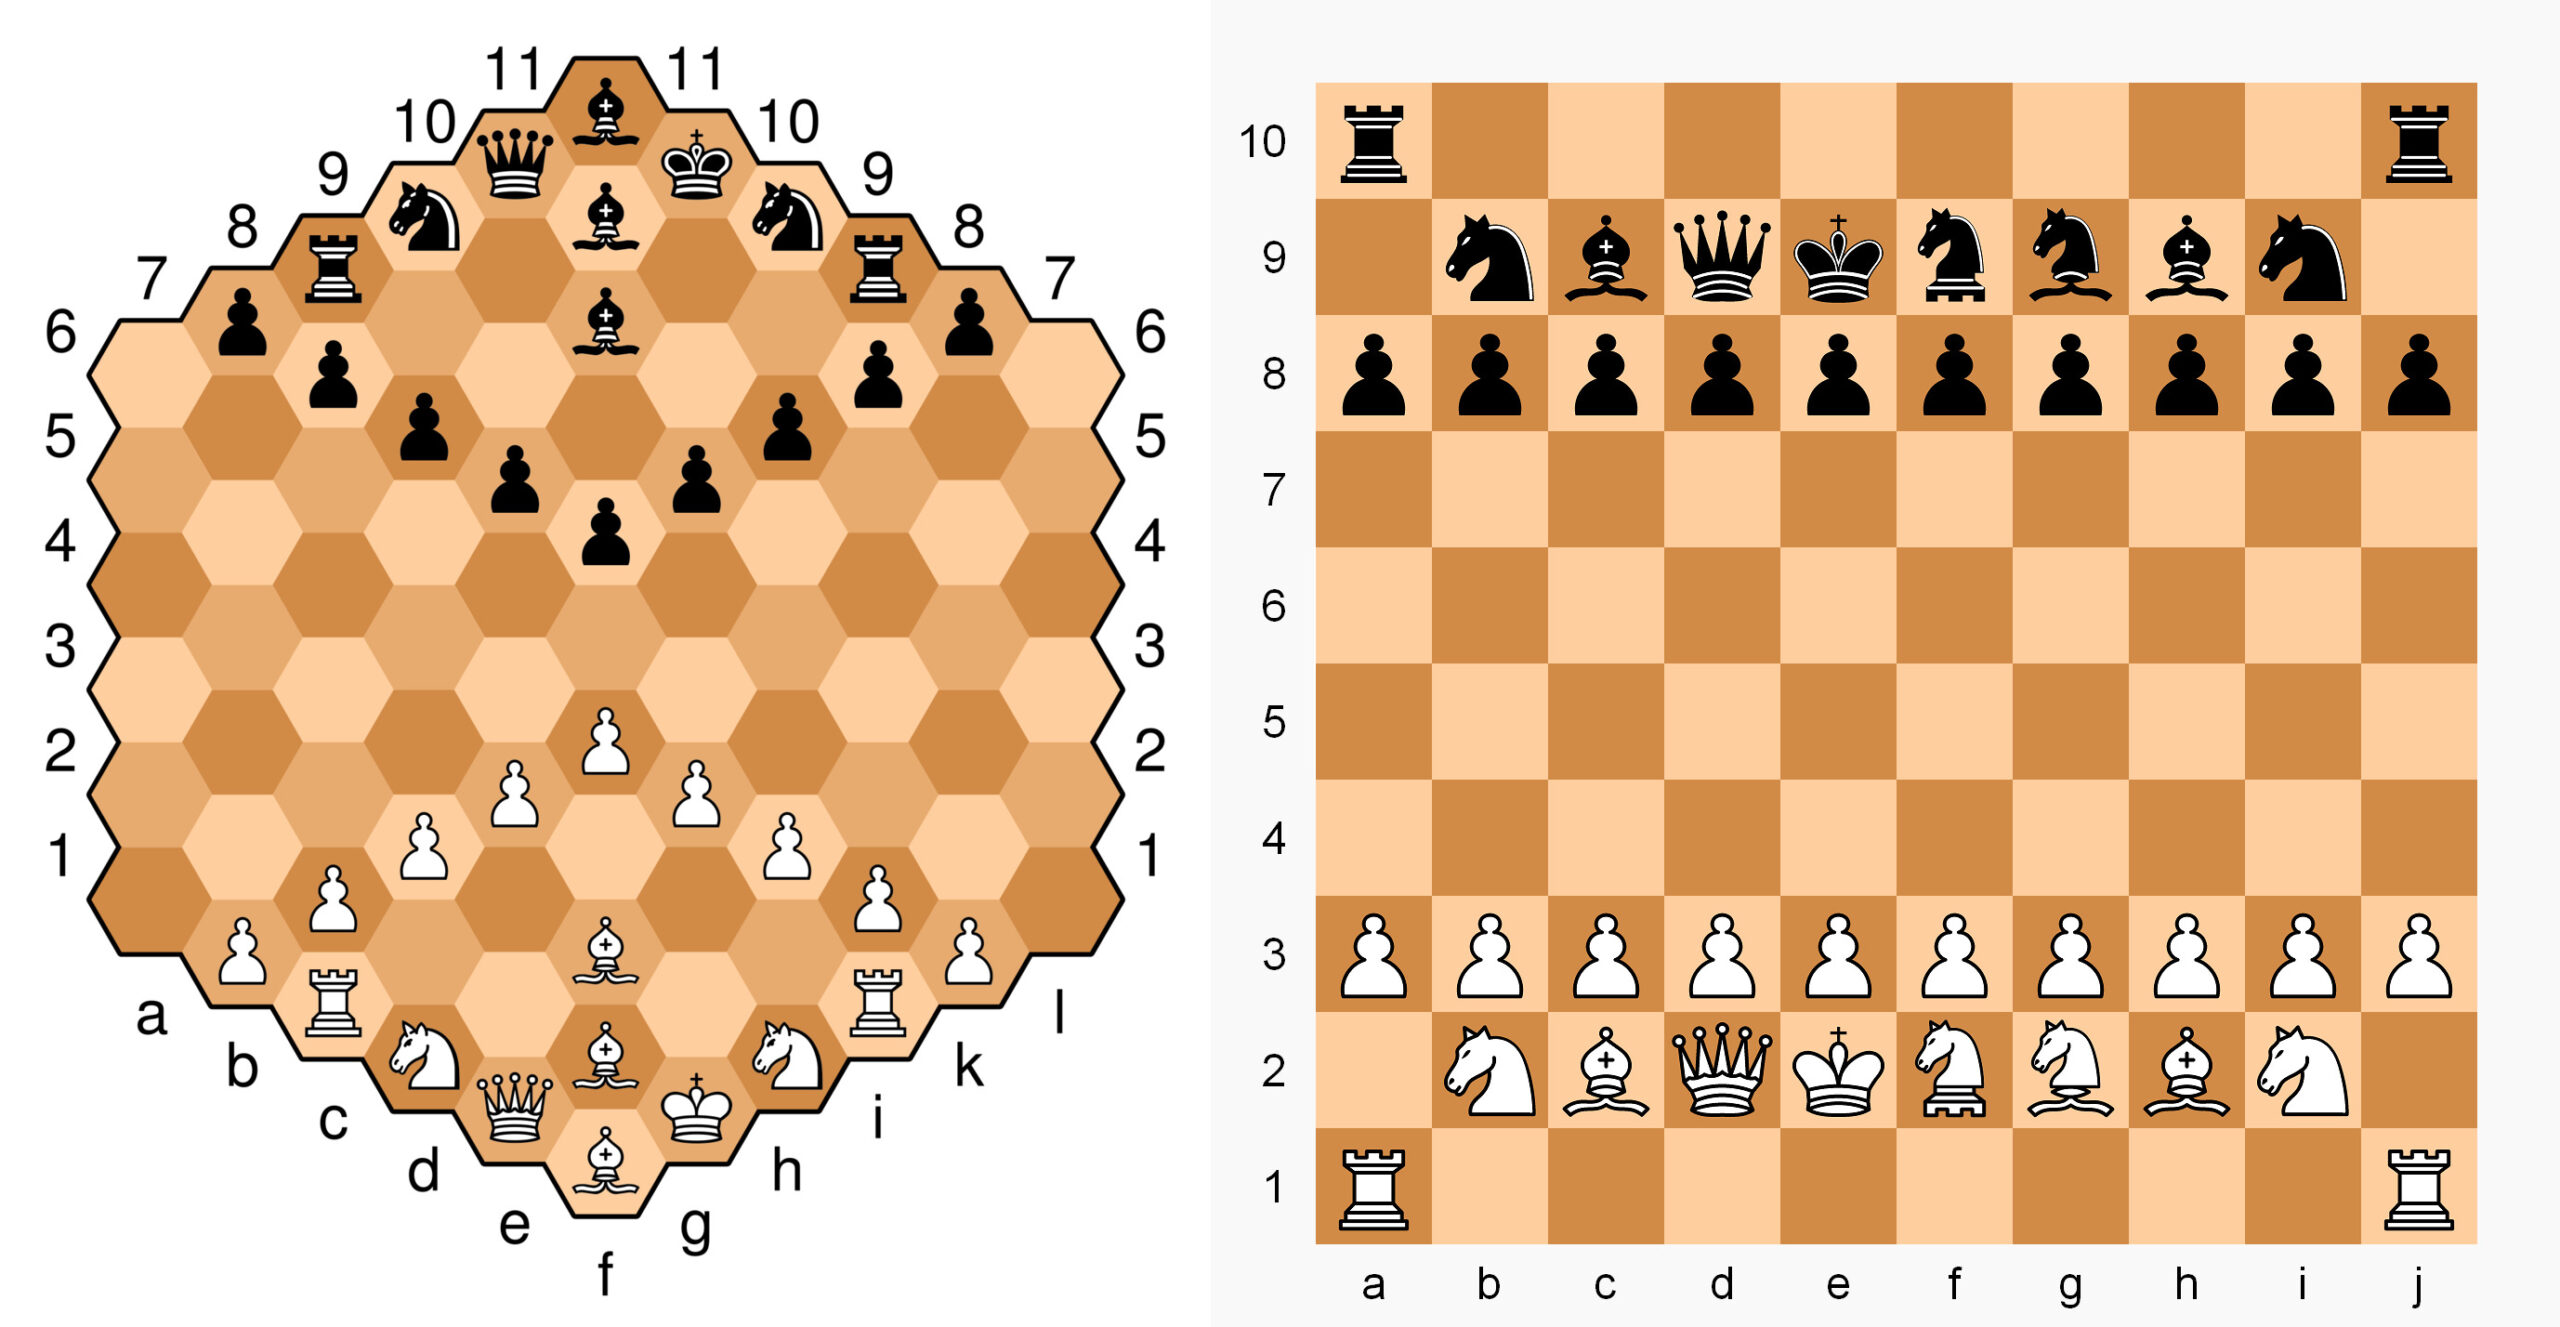 Two diagrams of unusually shaped chess boards side by side